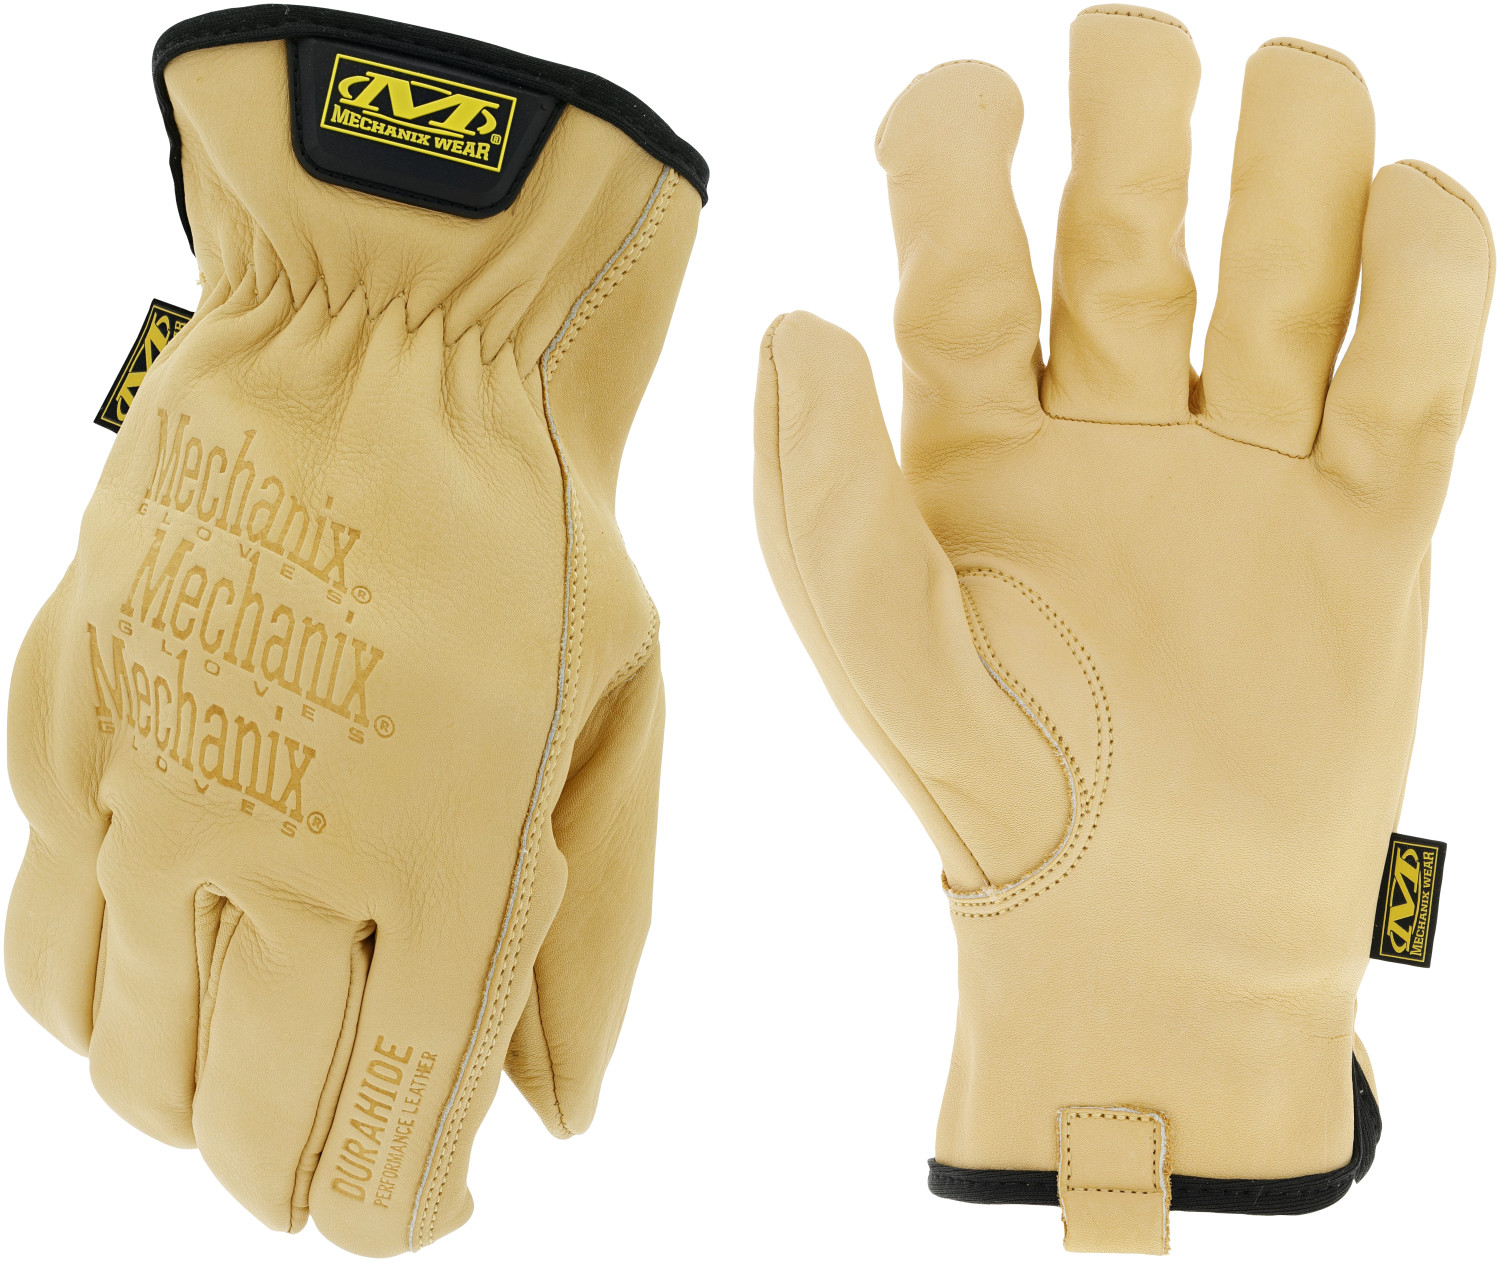 MECHANIX WEAR X-large Brown Leather Driving Gloves, (1-Pair) in